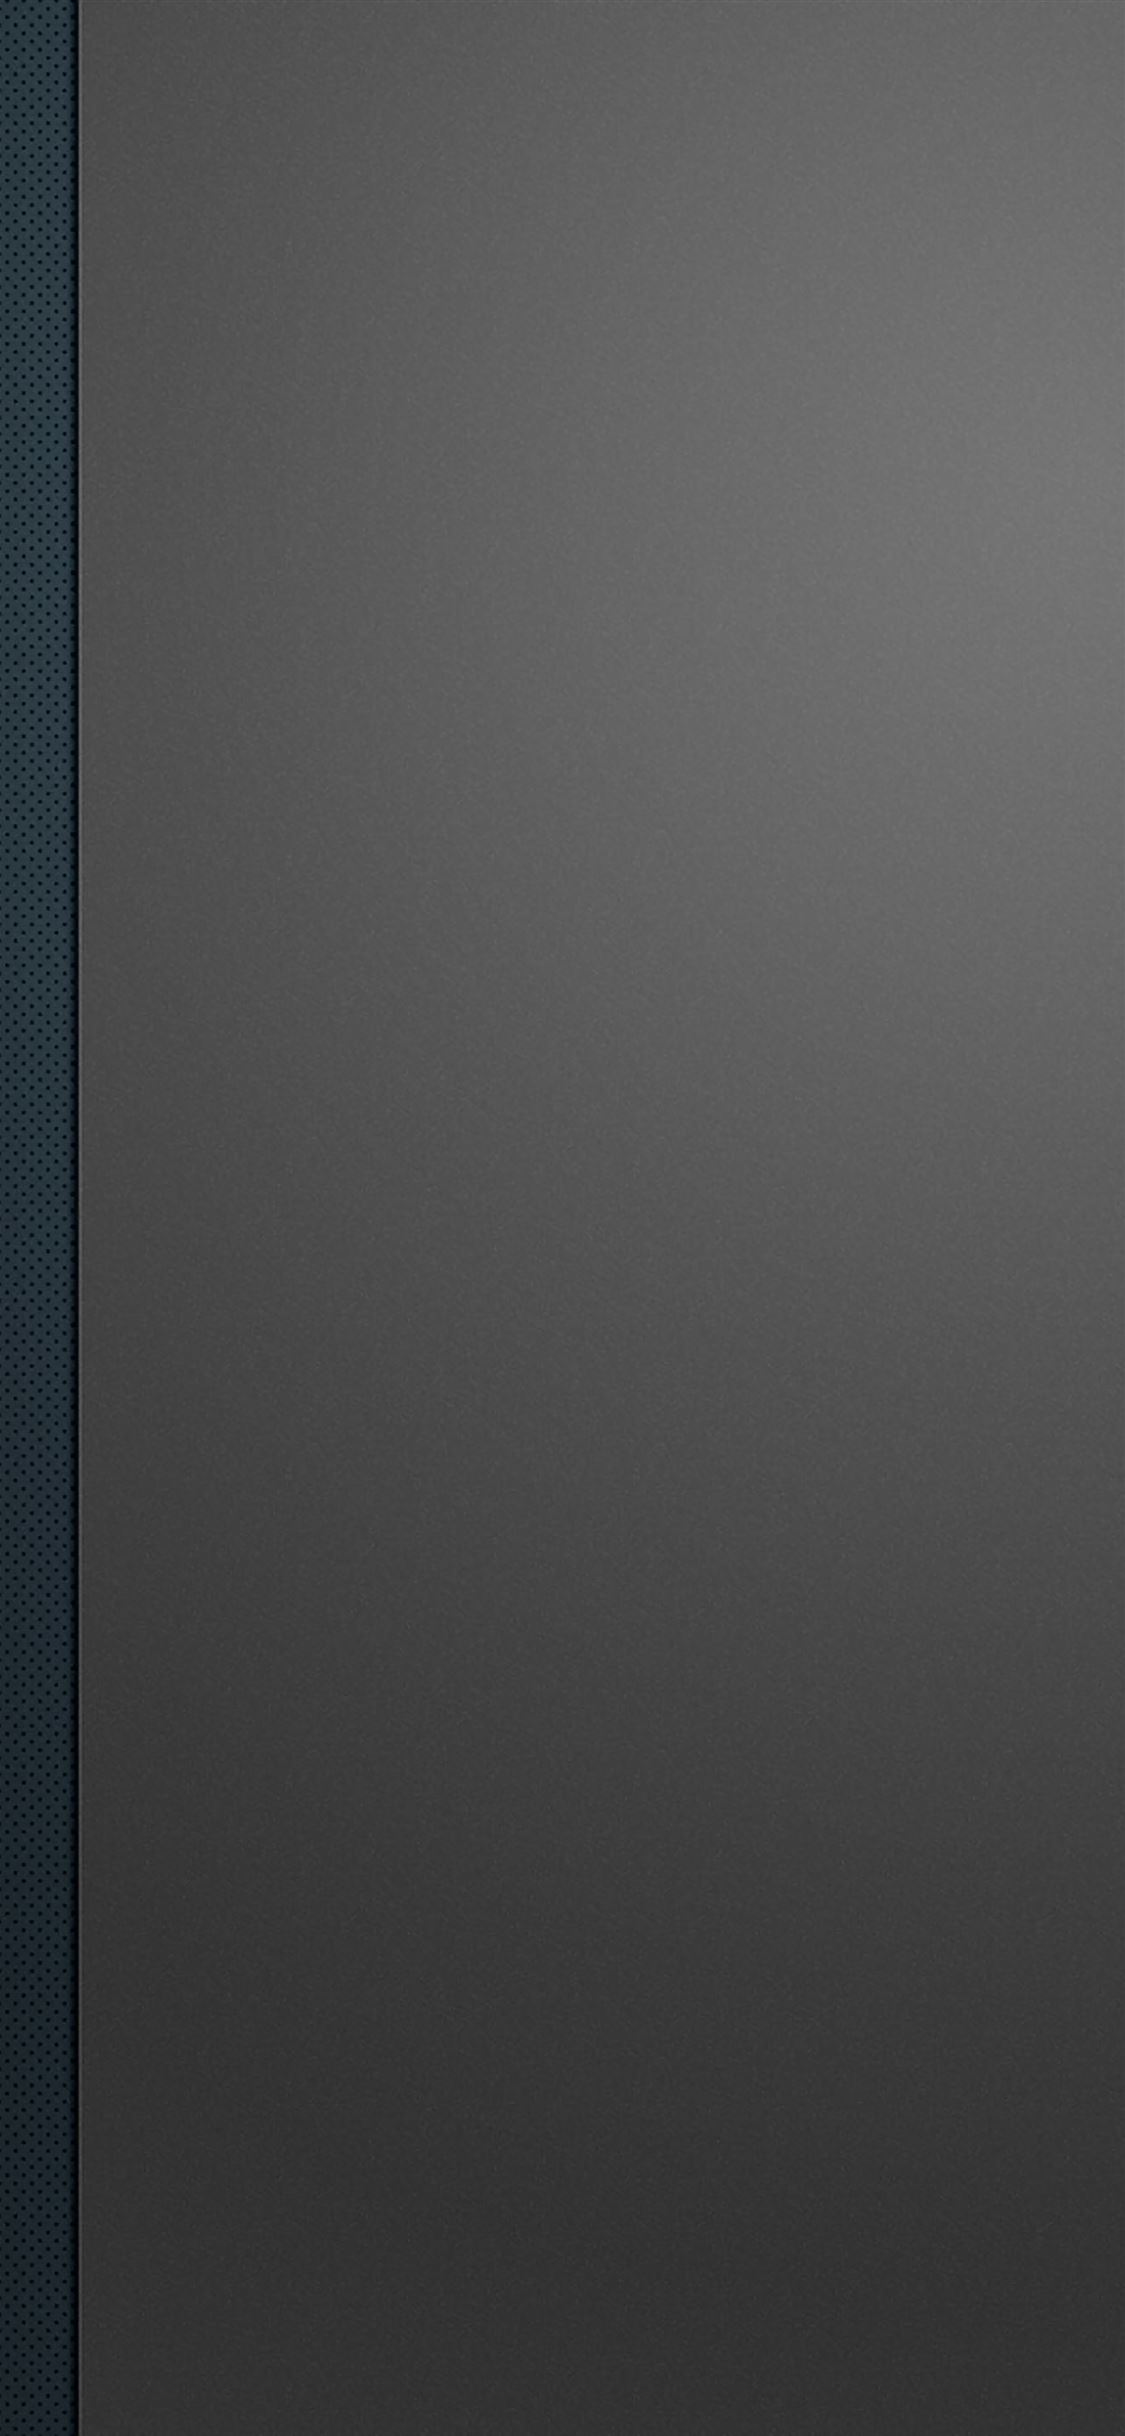 Gray and blue Metal iPhone Wallpapers Free Download